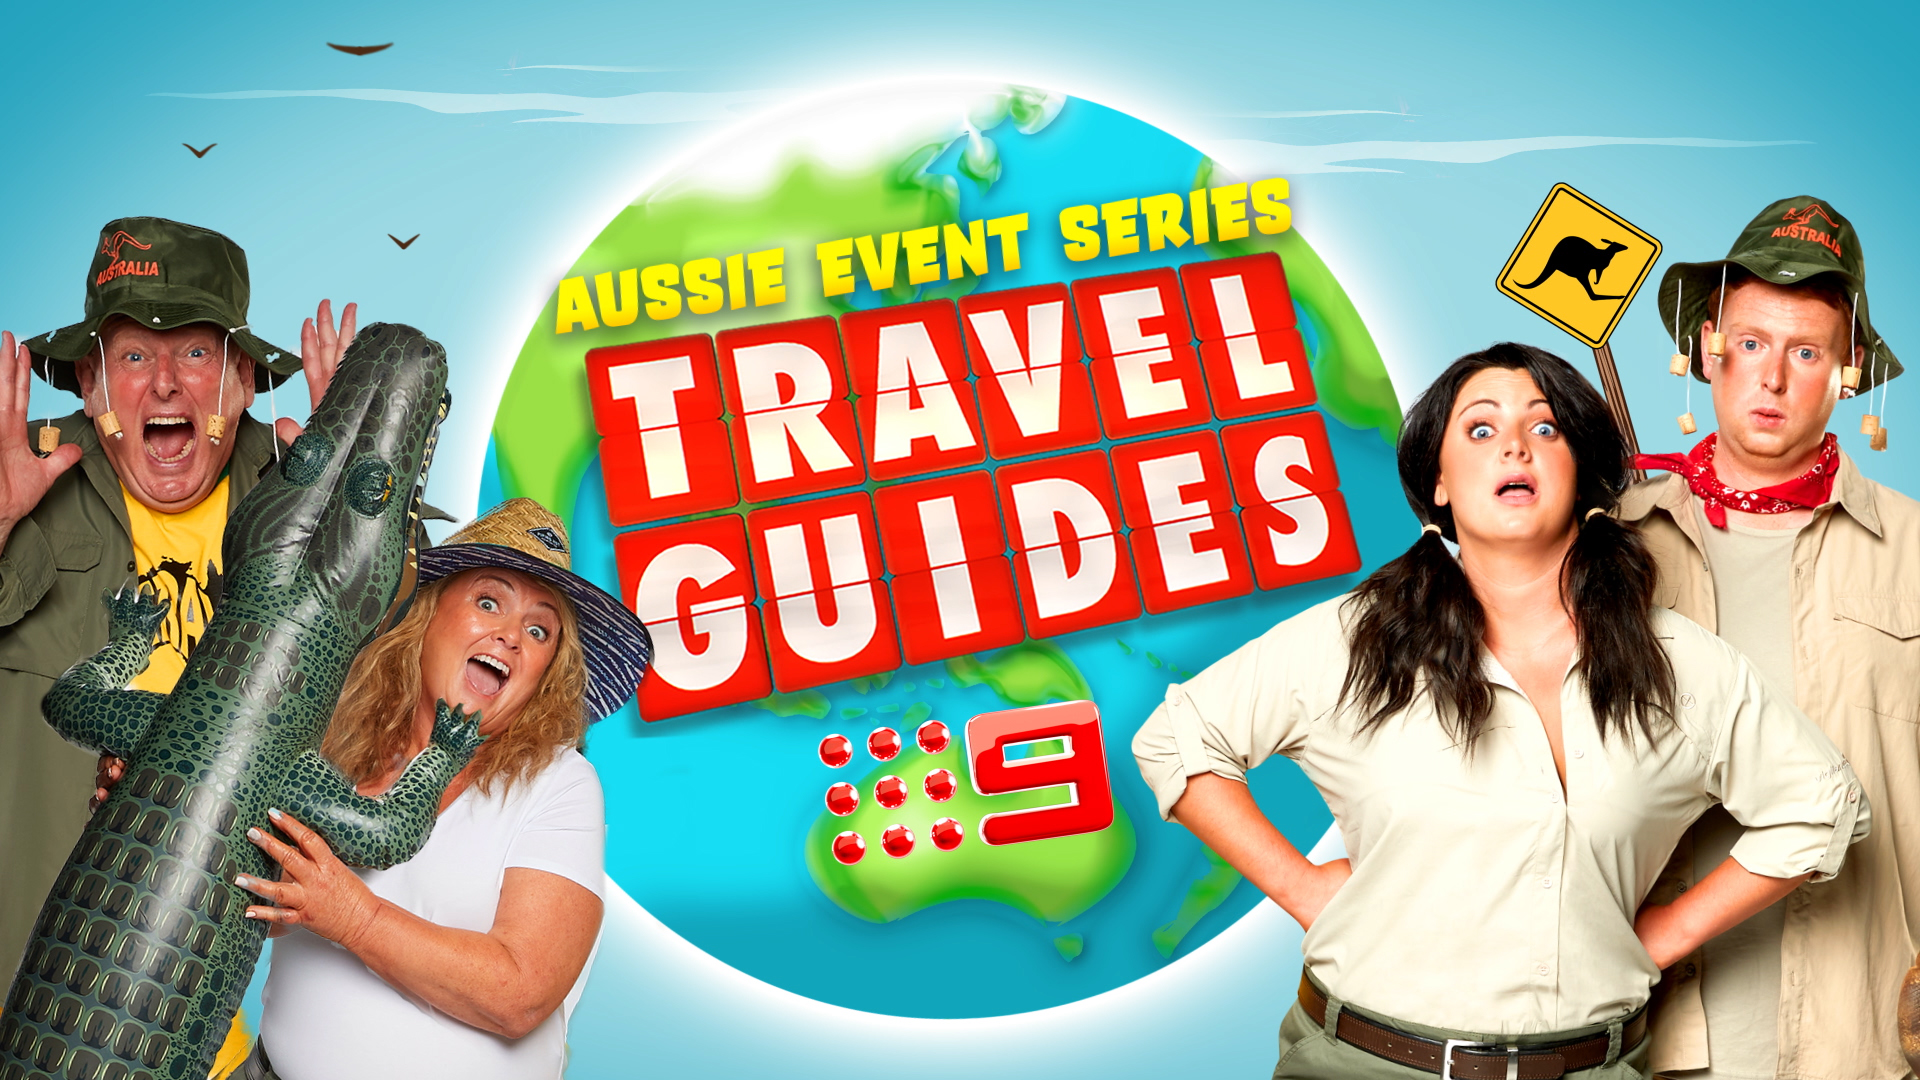 travel guides catch up